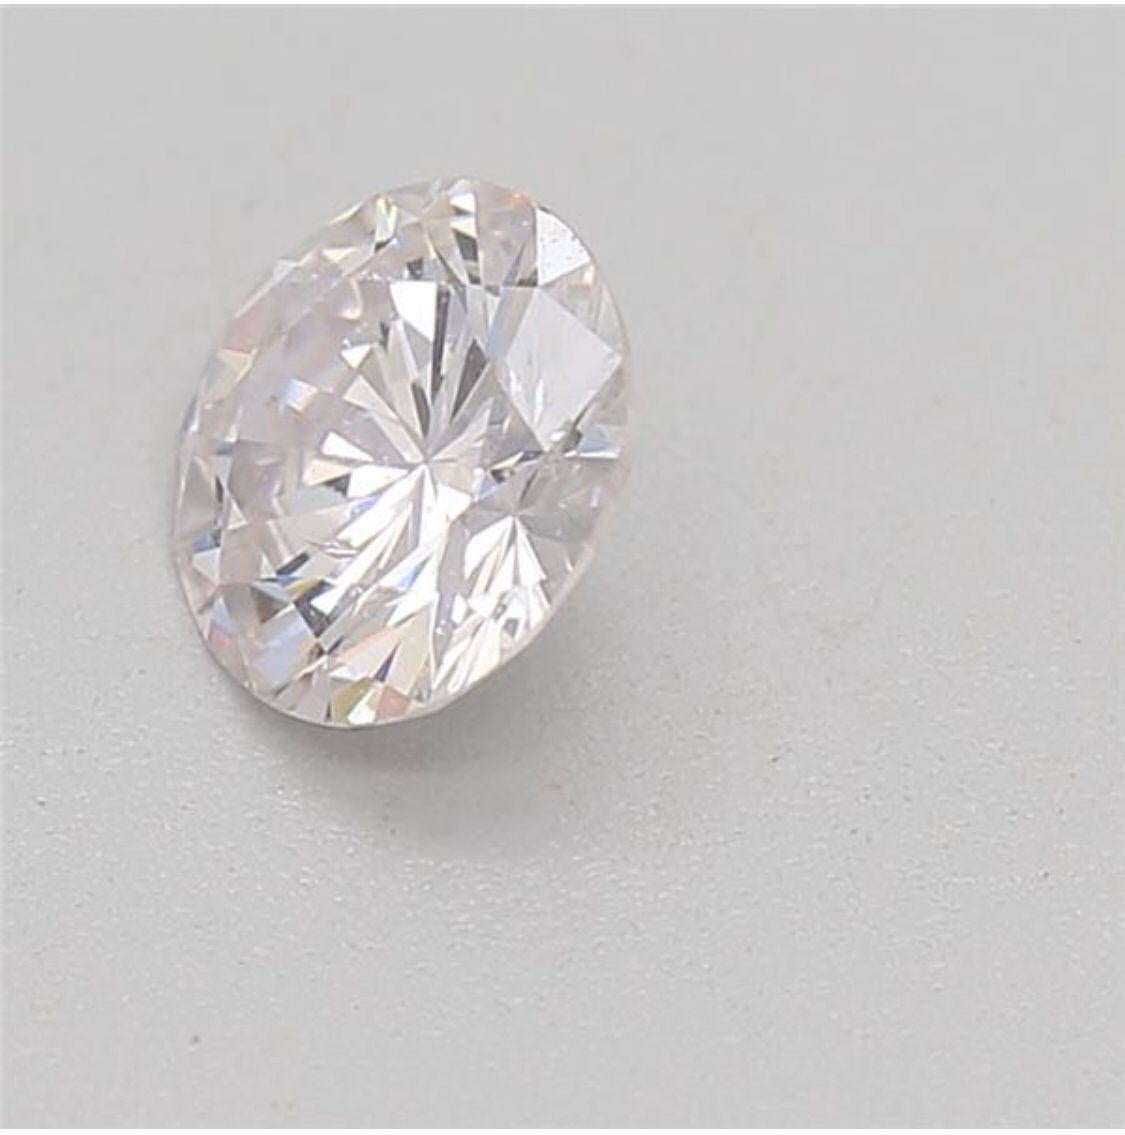 0.31 Carat Faint Pink Round Cut Diamond SI1 Clarity CGL Certified For Sale 9